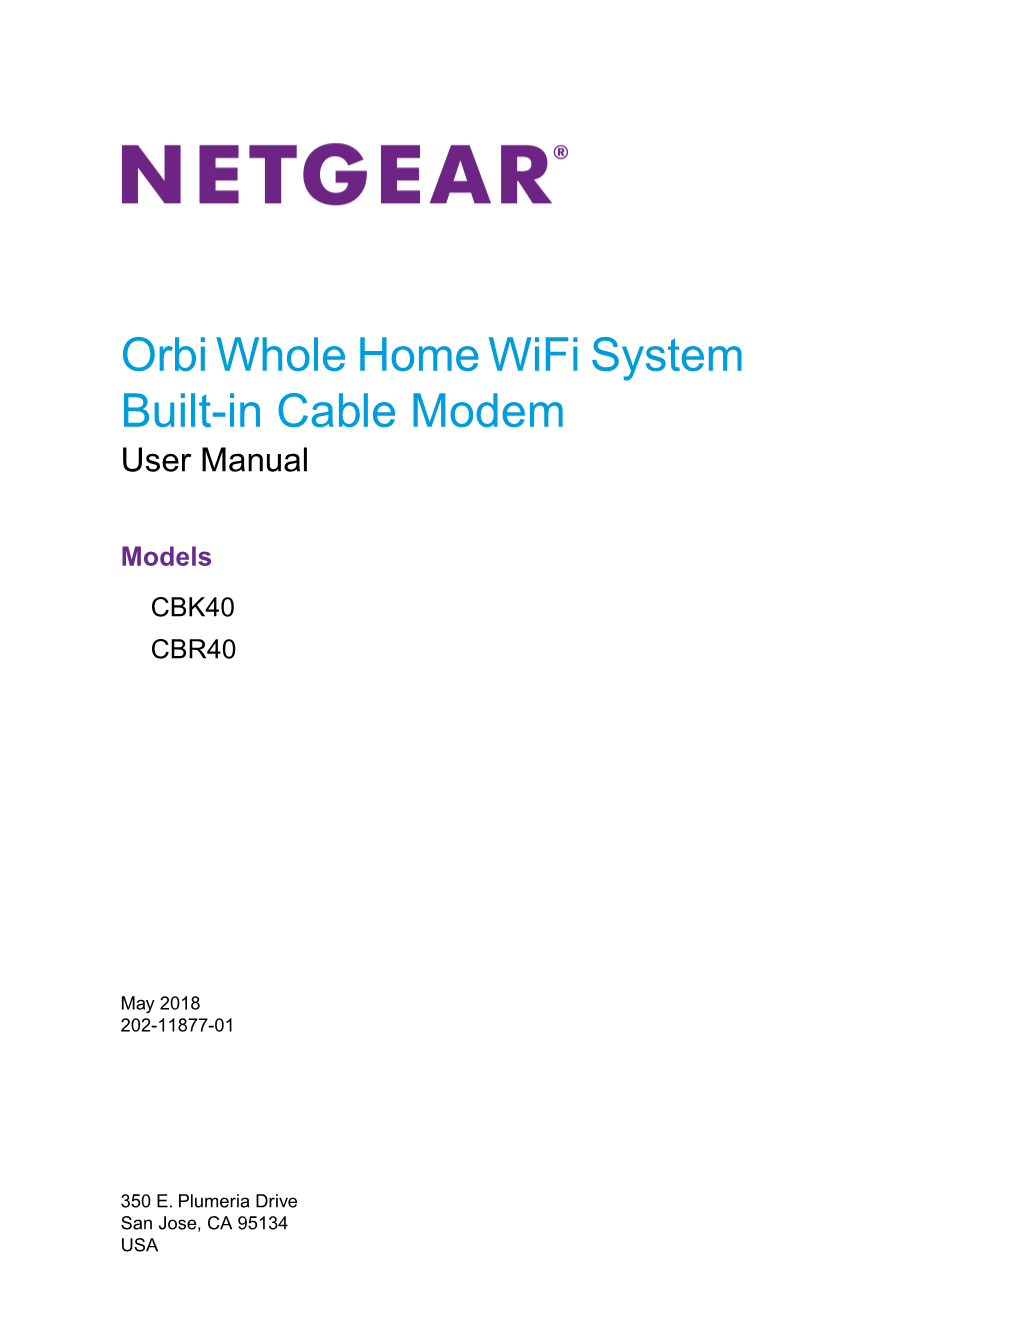 Orbi Whole Home Wifi System Built-In Cable Modem User Manual